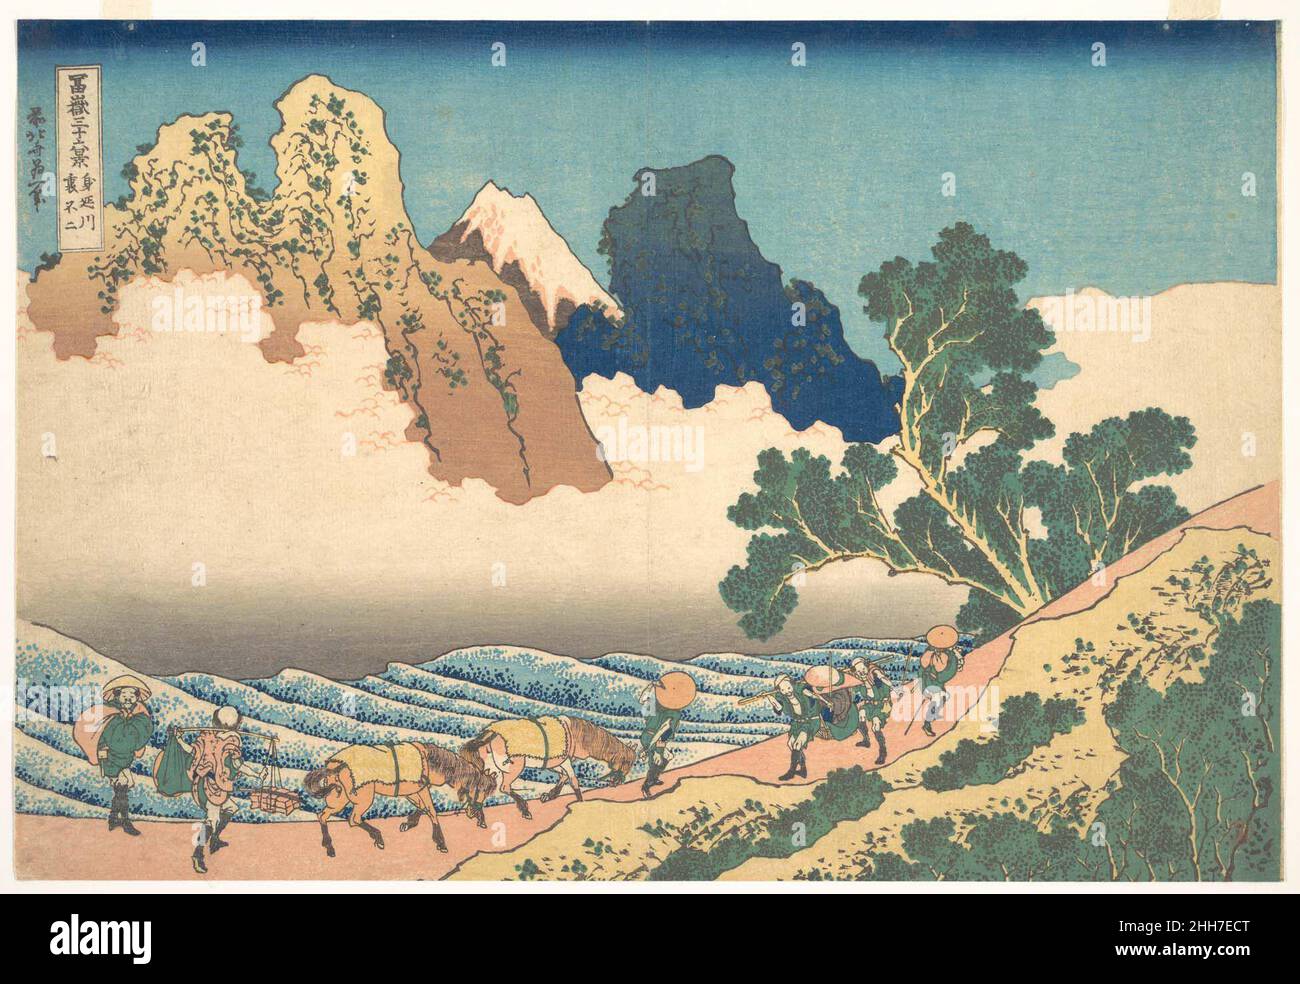 View from the Other Side of Fuji from the Minobu River (Minobugawa ura Fuji), from the series Thirty-six Views of Mount Fuji (Fugaku sanj?rokkei) ca. 1830–32 Katsushika Hokusai Japanese Servants with two horses meet a group of travelers on the bank of the roaring Minobu River. On the opposite side of the river, Fuji rises between rugged brown and blue crags. The tree in the foreground reaches across the rough waters, directing the viewer's eye toward the majestic mountain.. View from the Other Side of Fuji from the Minobu River (Minobugawa ura Fuji), from the series Thirty-six Views of Mount F Stock Photo